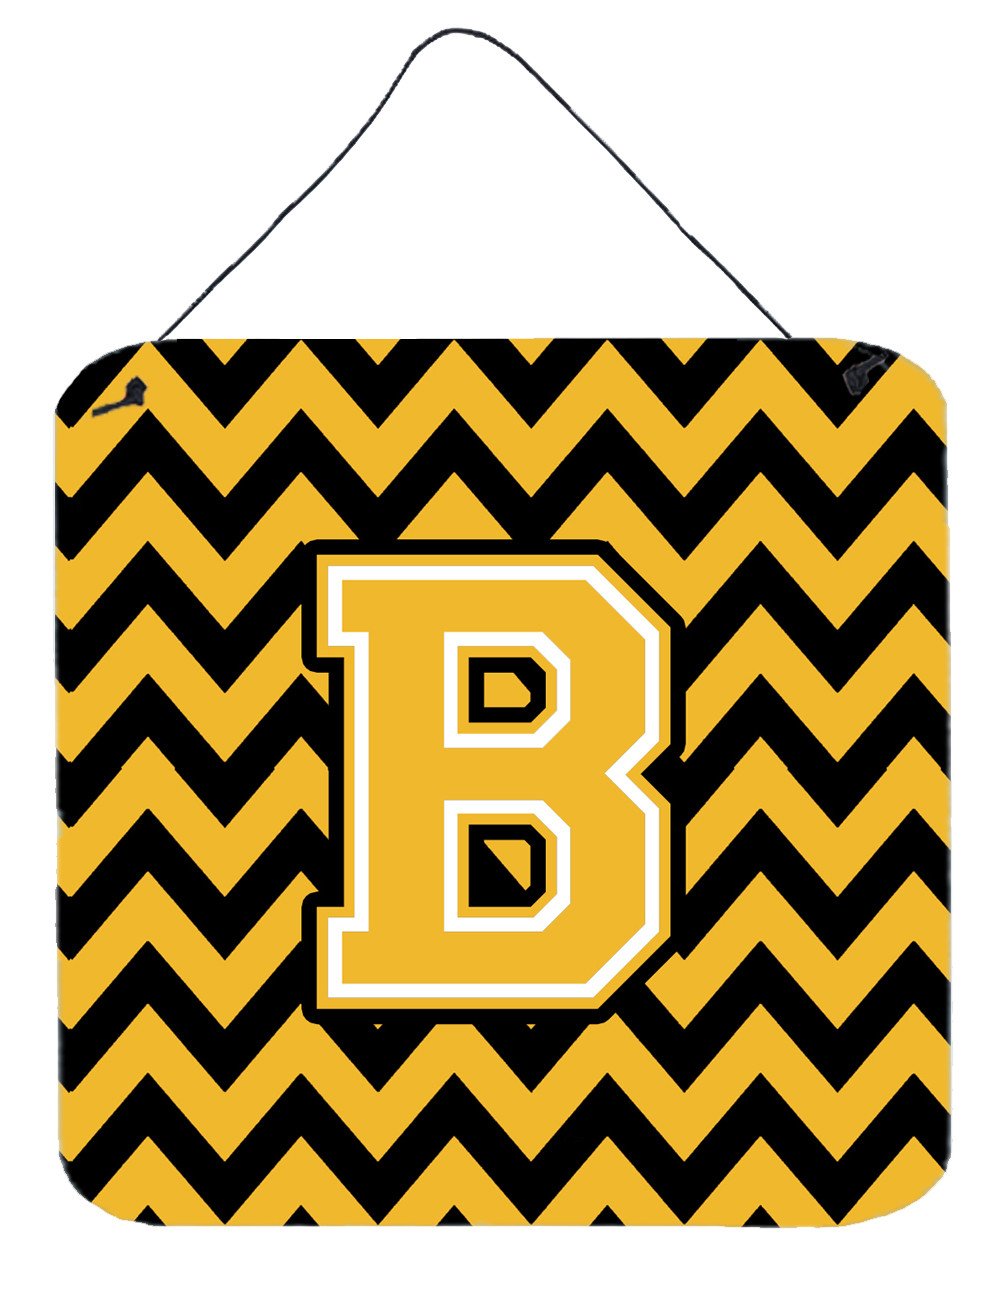 Letter B Chevron Black and Gold Wall or Door Hanging Prints CJ1053-BDS66 by Caroline's Treasures